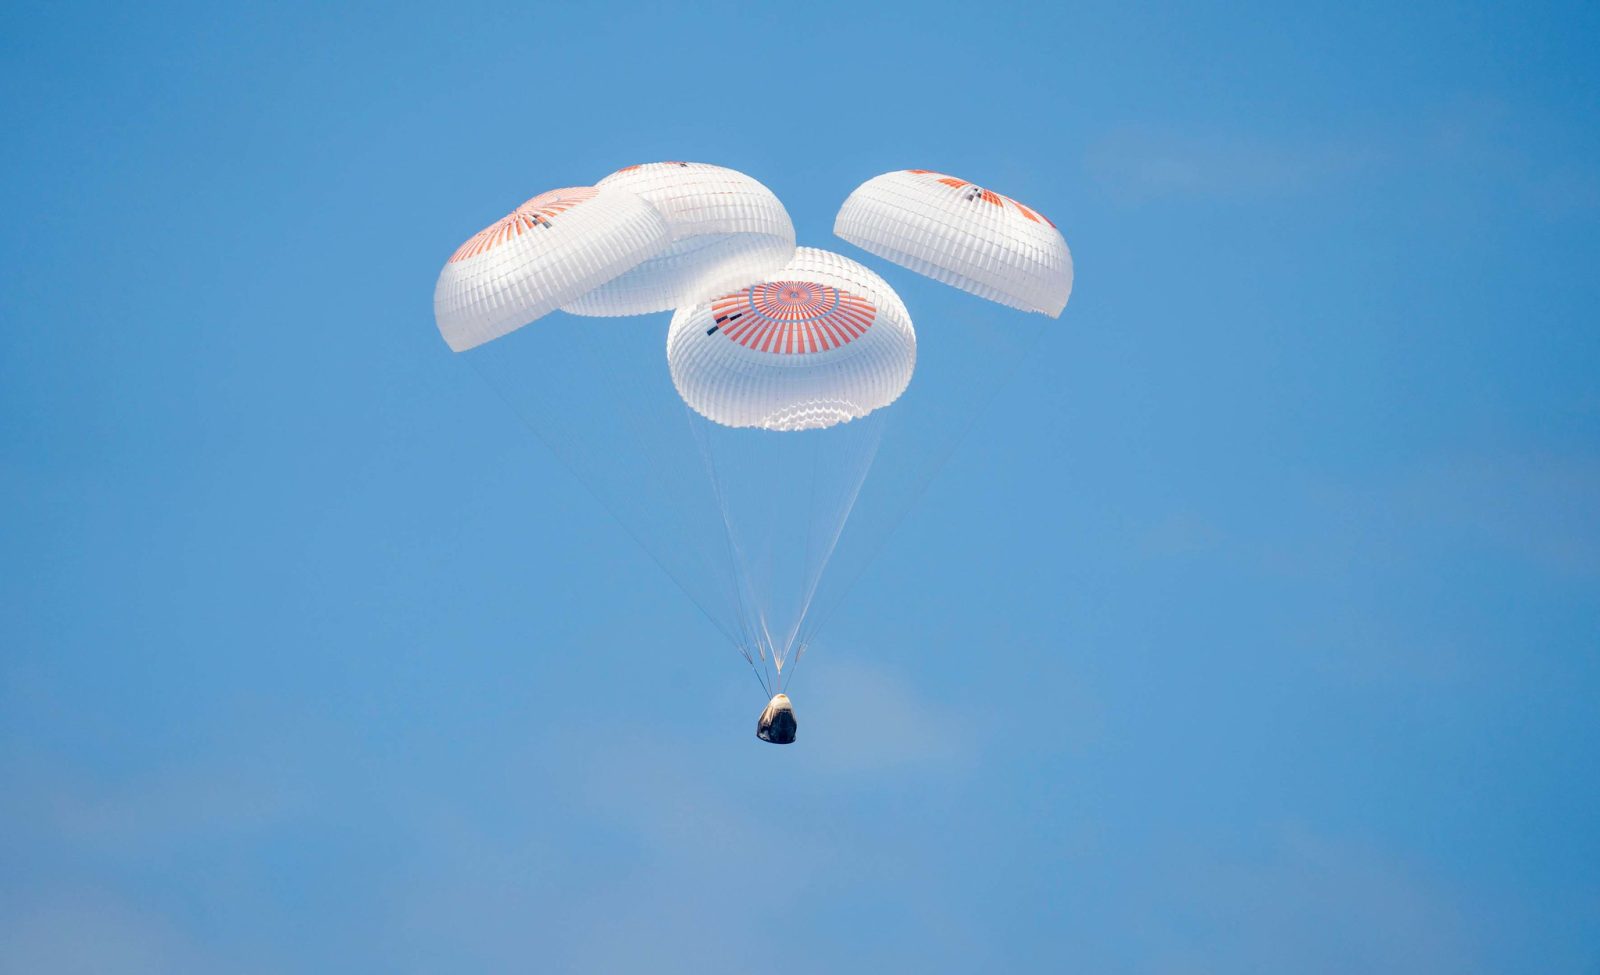 SpaceX Dragon capsule splashes down off the coast of Florida